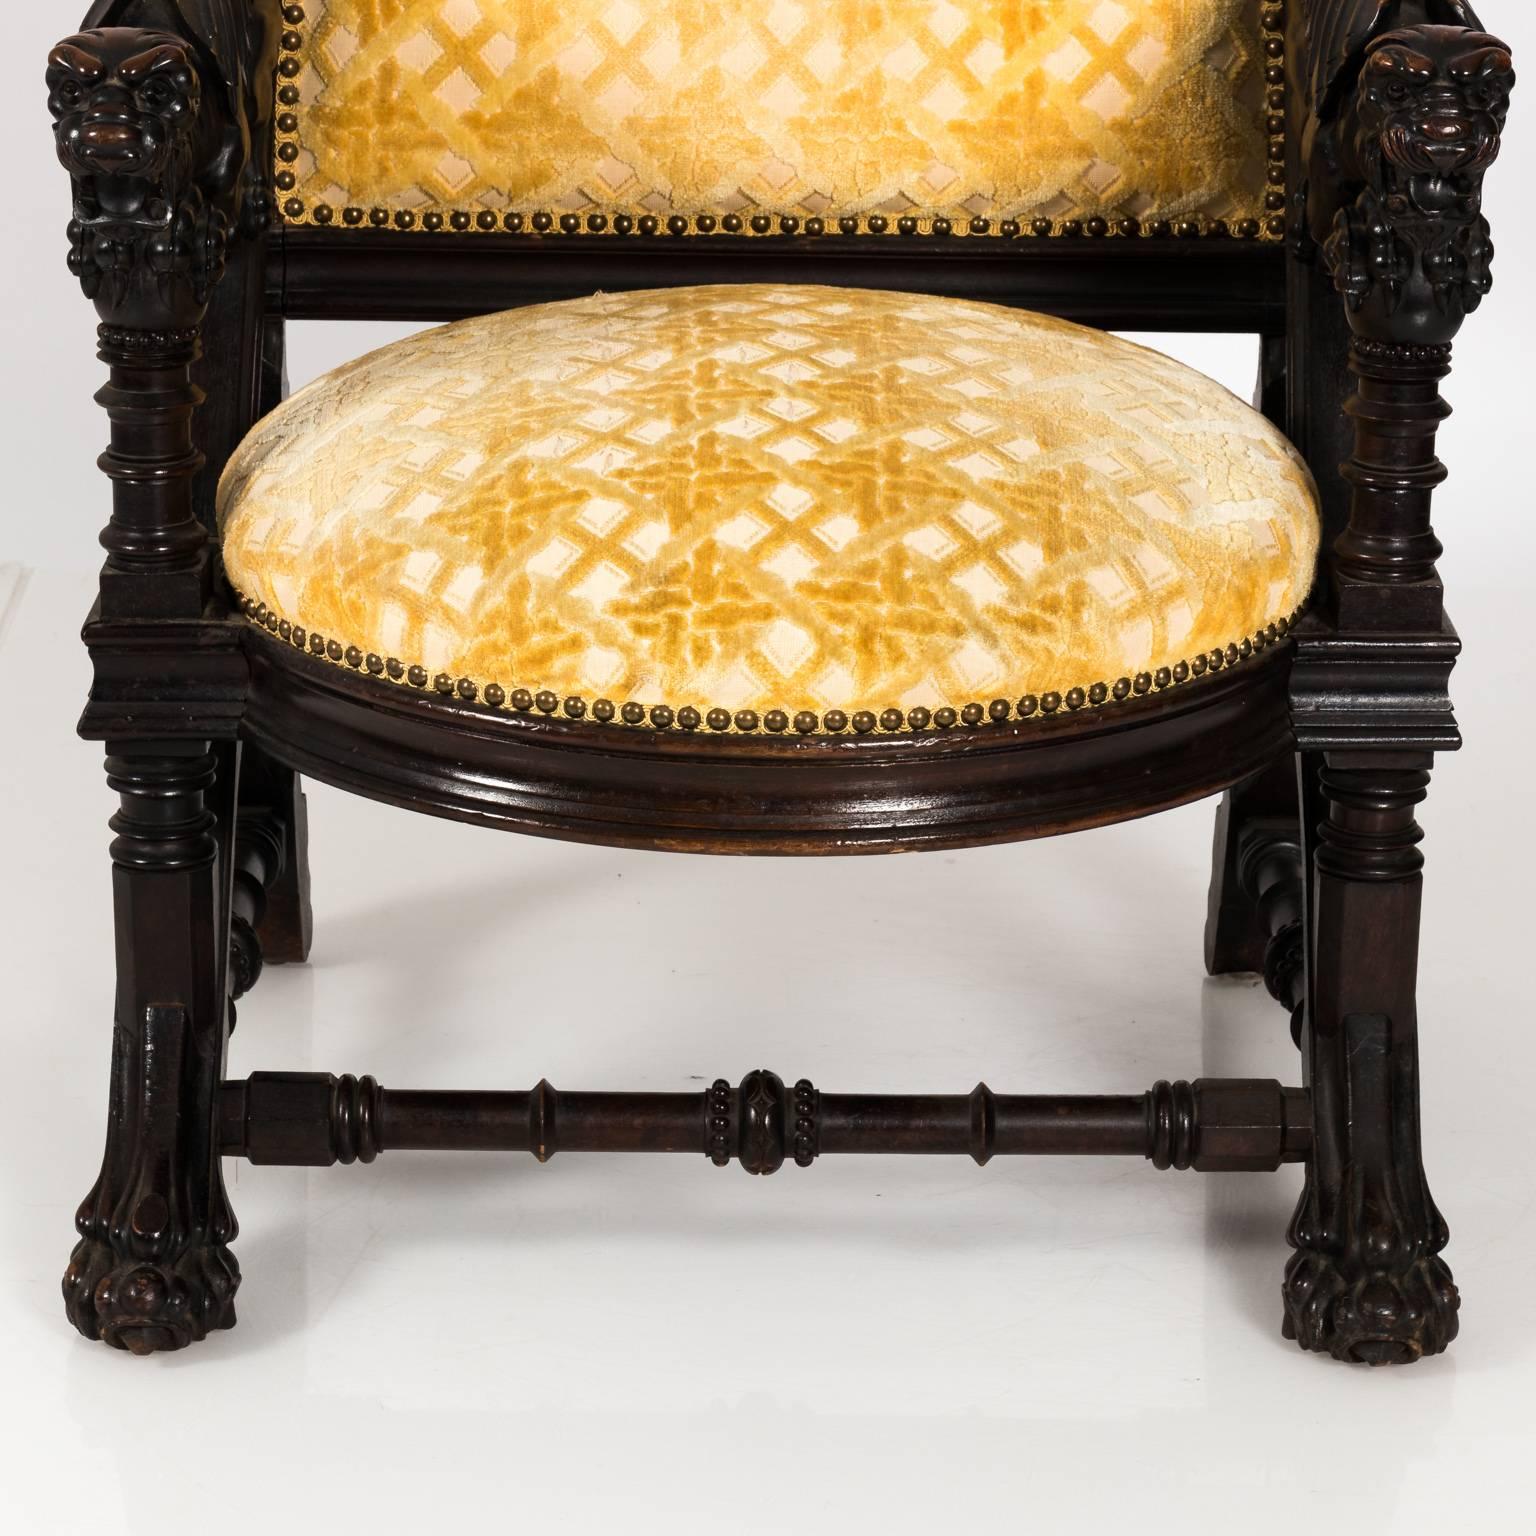 Pair of American Gothic Revival Armchairs by Daniel Pabst, circa 1878 For Sale 6